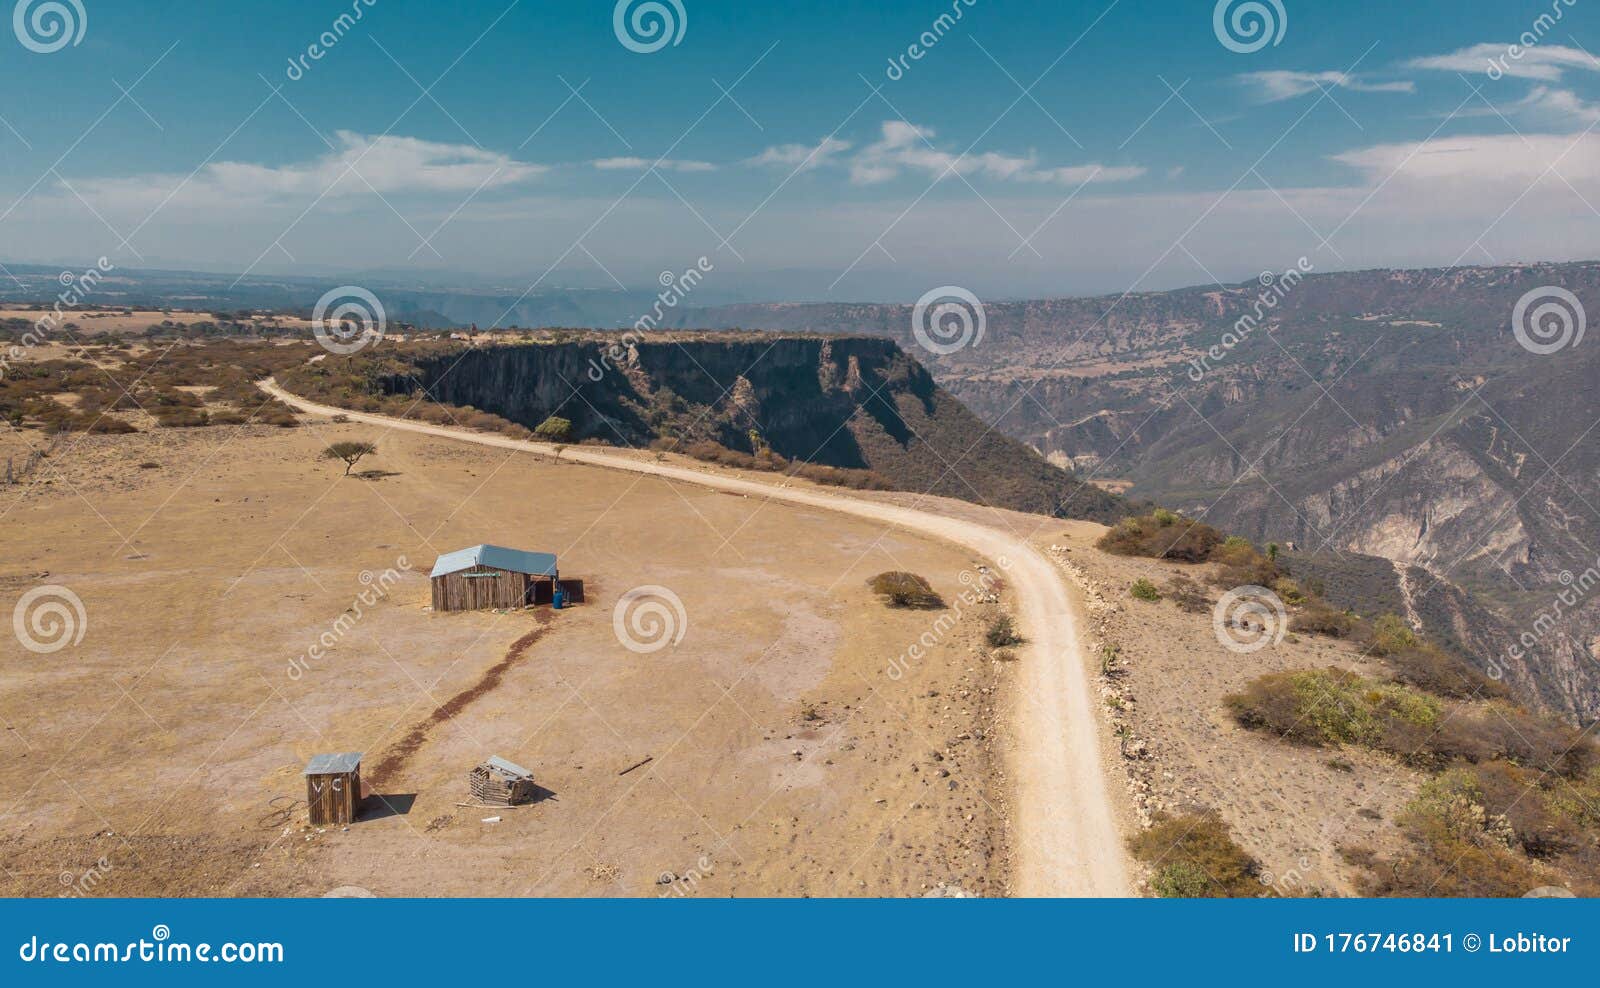 small house in the middle of the desert next to the a cliff in peÃÂ±a al aire libre state of hidalgo